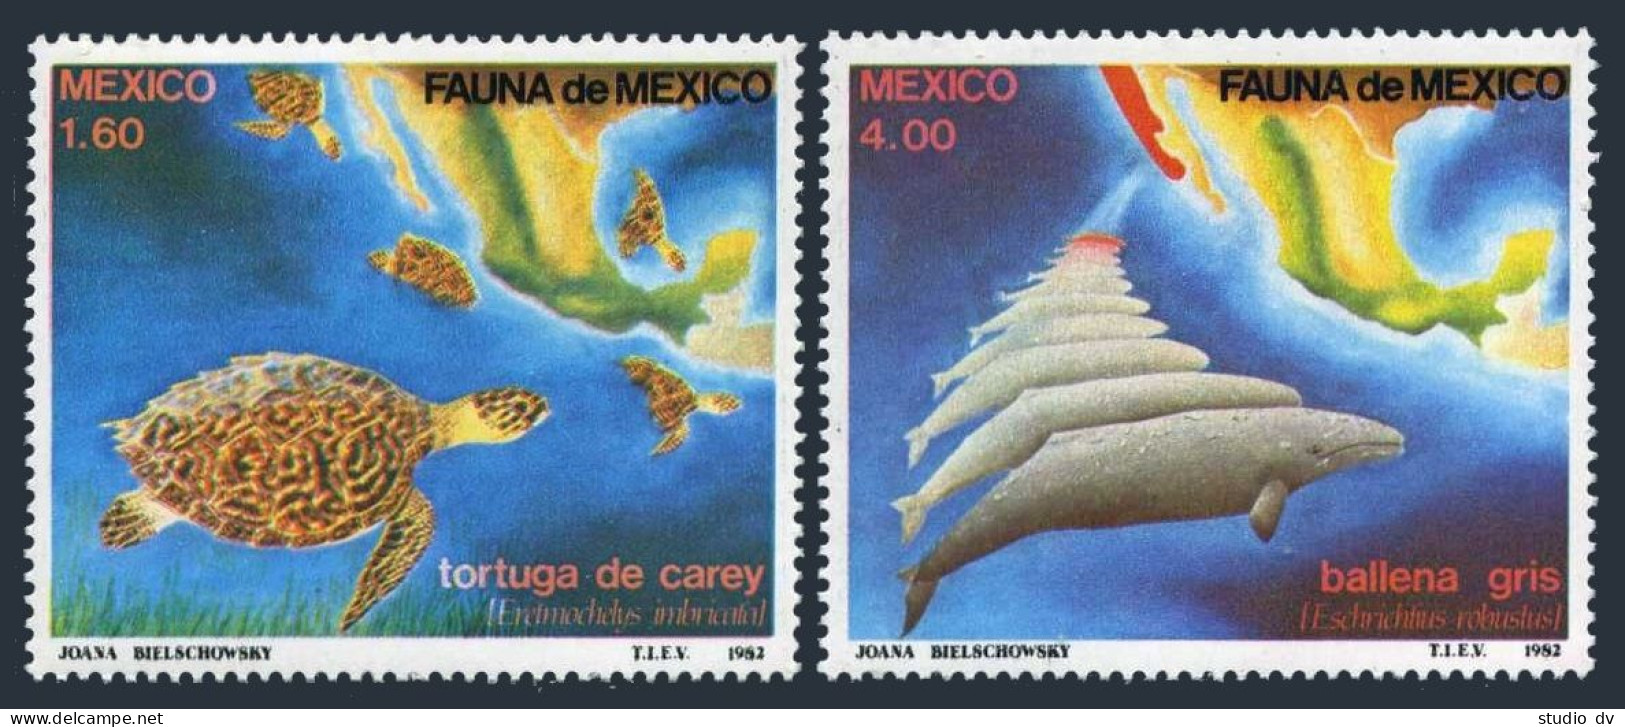 Mexico 1281-1282, MNH. Michel 1828-1829. Turtles, Gray Whales, 1982. - Mexico